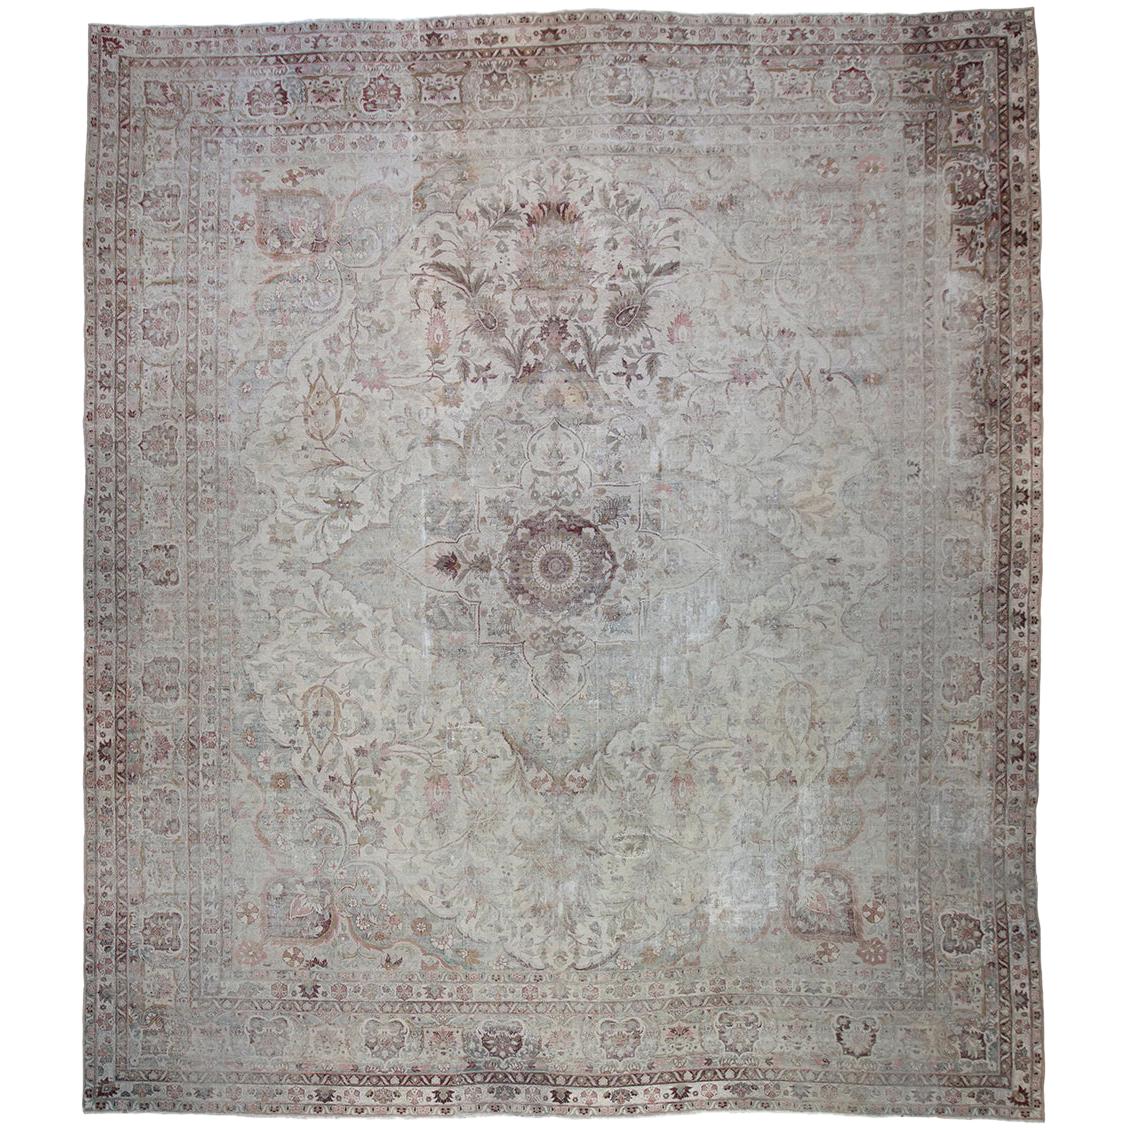 Giant Amritsar Carpet with Wear 'DK-113-99' For Sale